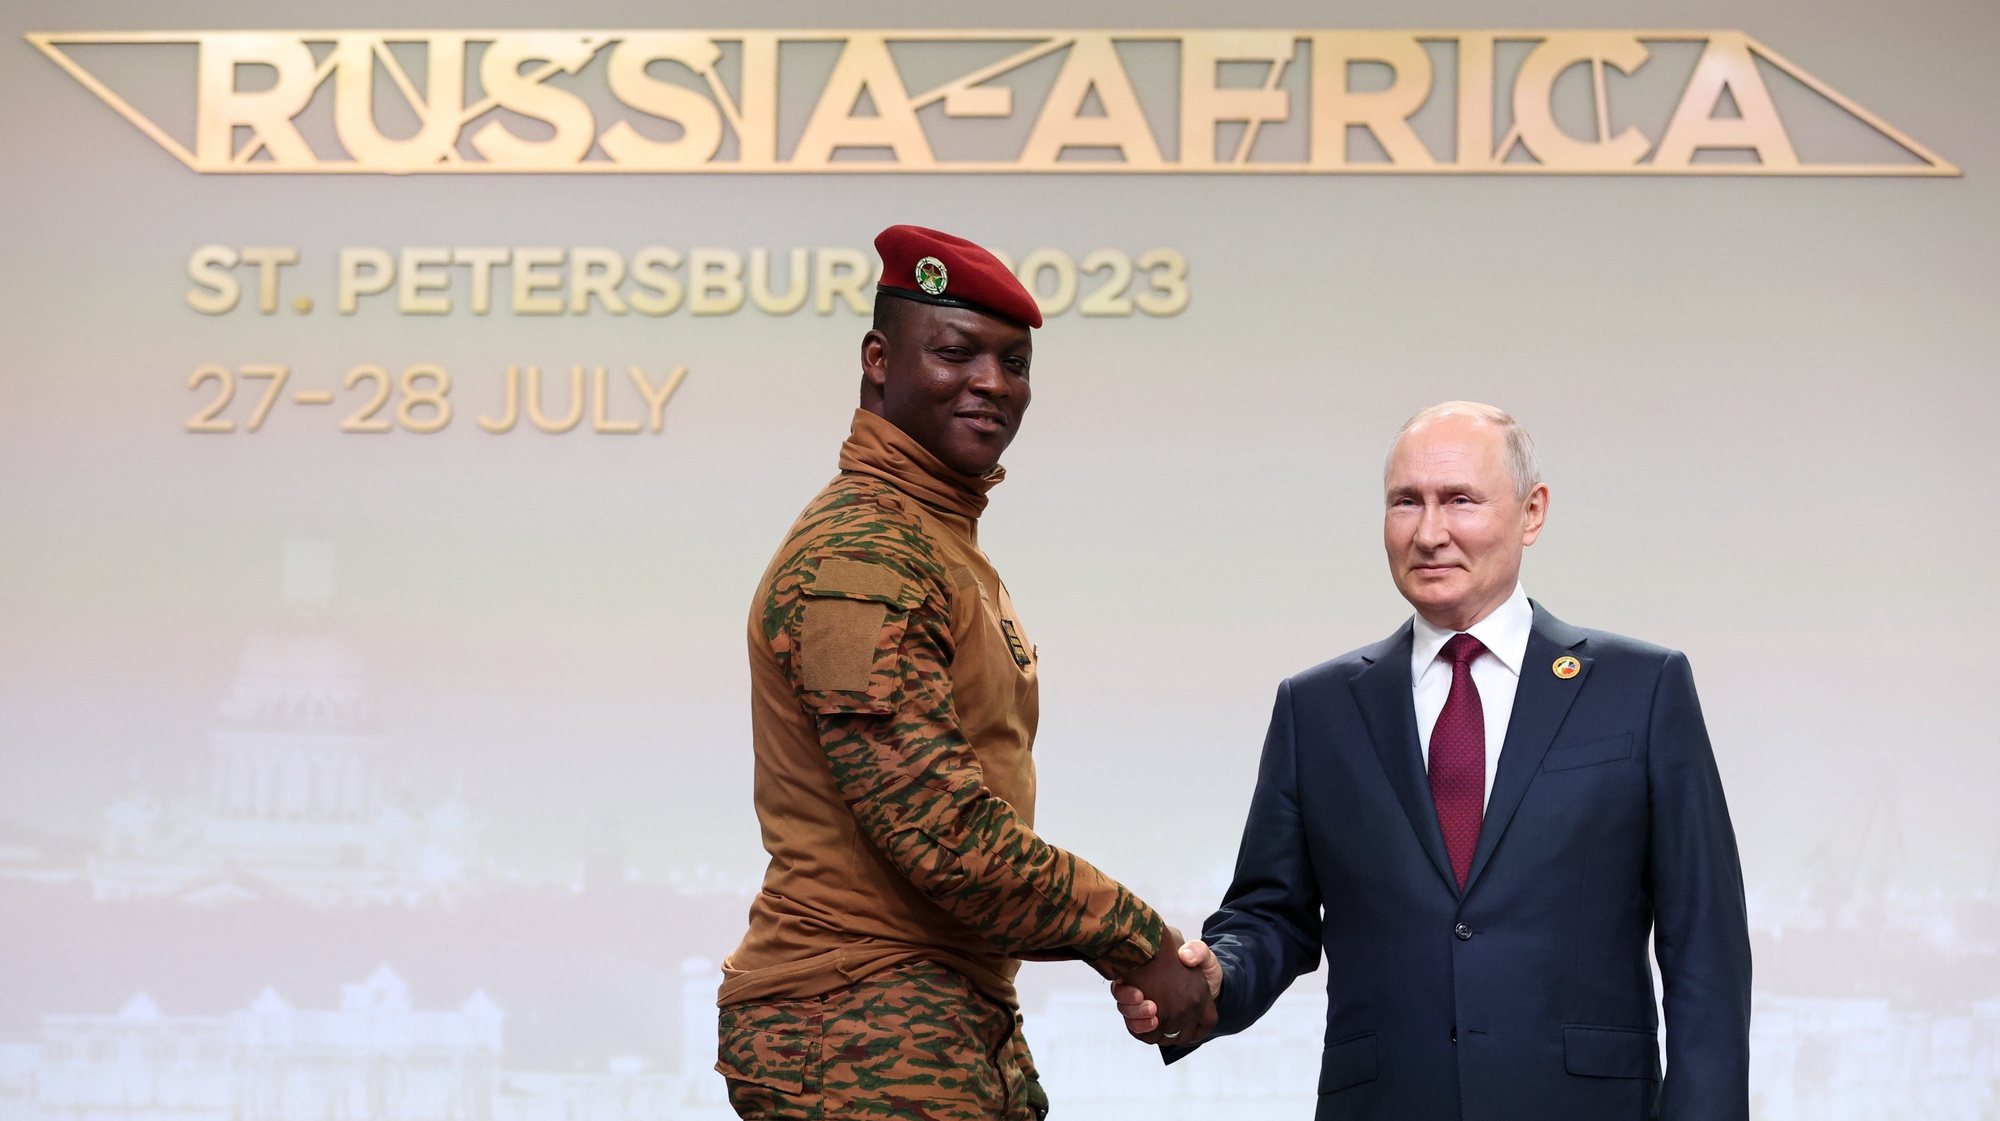 epa10772175 A handout photo made available by TASS Host Photo Agency shows Russian President Vladimir Putin (R) and Burkina Faso President Ibrahim Traore (L), during an official meeting ceremony of the heads of participating delegations of the Second Summit Economic and Humanitarian Forum &#039;Russia-Africa&#039; in St.Petersburg, Russia, 27 July 2023. The Second Summit Economic and Humanitarian Forum &#039;Russia-Africa&#039; will take place from July 27 to 28 at the congress-exhibition center Expoforum in St.Petersburg.  EPA/Sergei Bobylev / TASS Host Photo Agency / HANDOUT MANDATORY CREDIT HANDOUT EDITORIAL USE ONLY/NO SALES